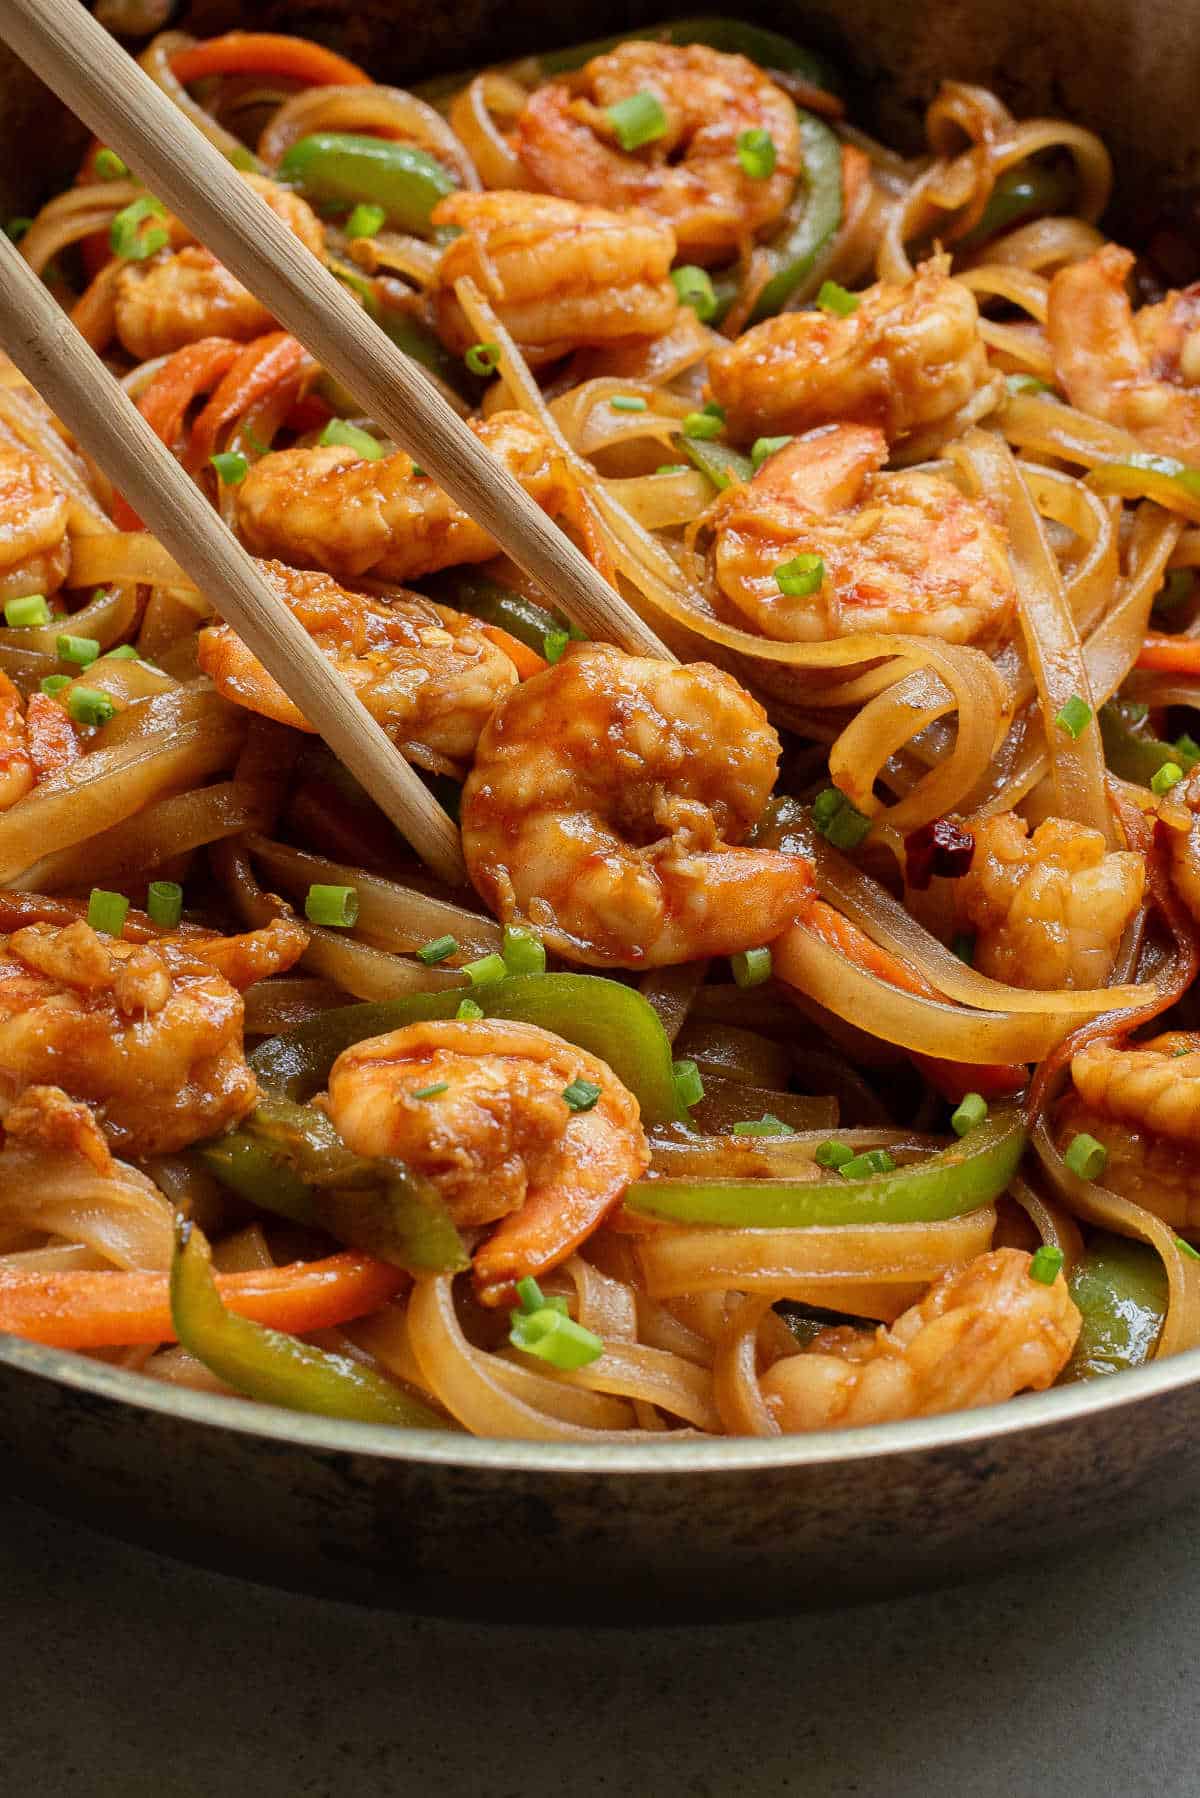 Close-up image of an easy stir-fried shrimp and vegetable dinner with noodles, vibrant green bell peppers, and carrots, served in a dark bowl with chopsticks.